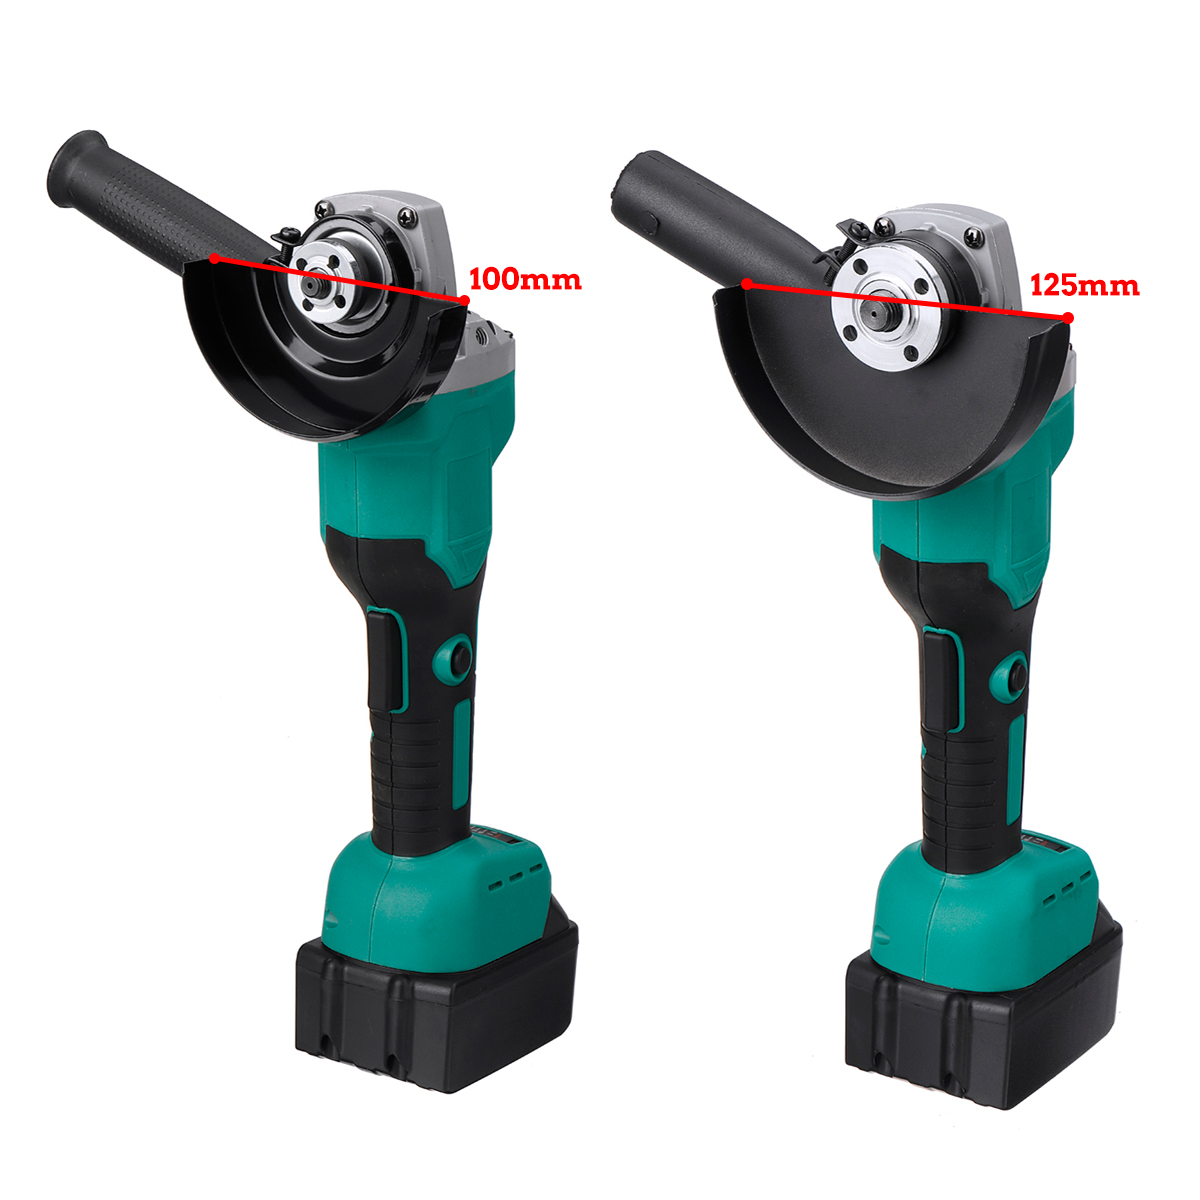 100mm125mm-Brushless-Electric-Angle-Grinder-Polishing-Grinding-Cutting-Tool-W-1pc2pcs-Battery-For-Ma-1926096-9